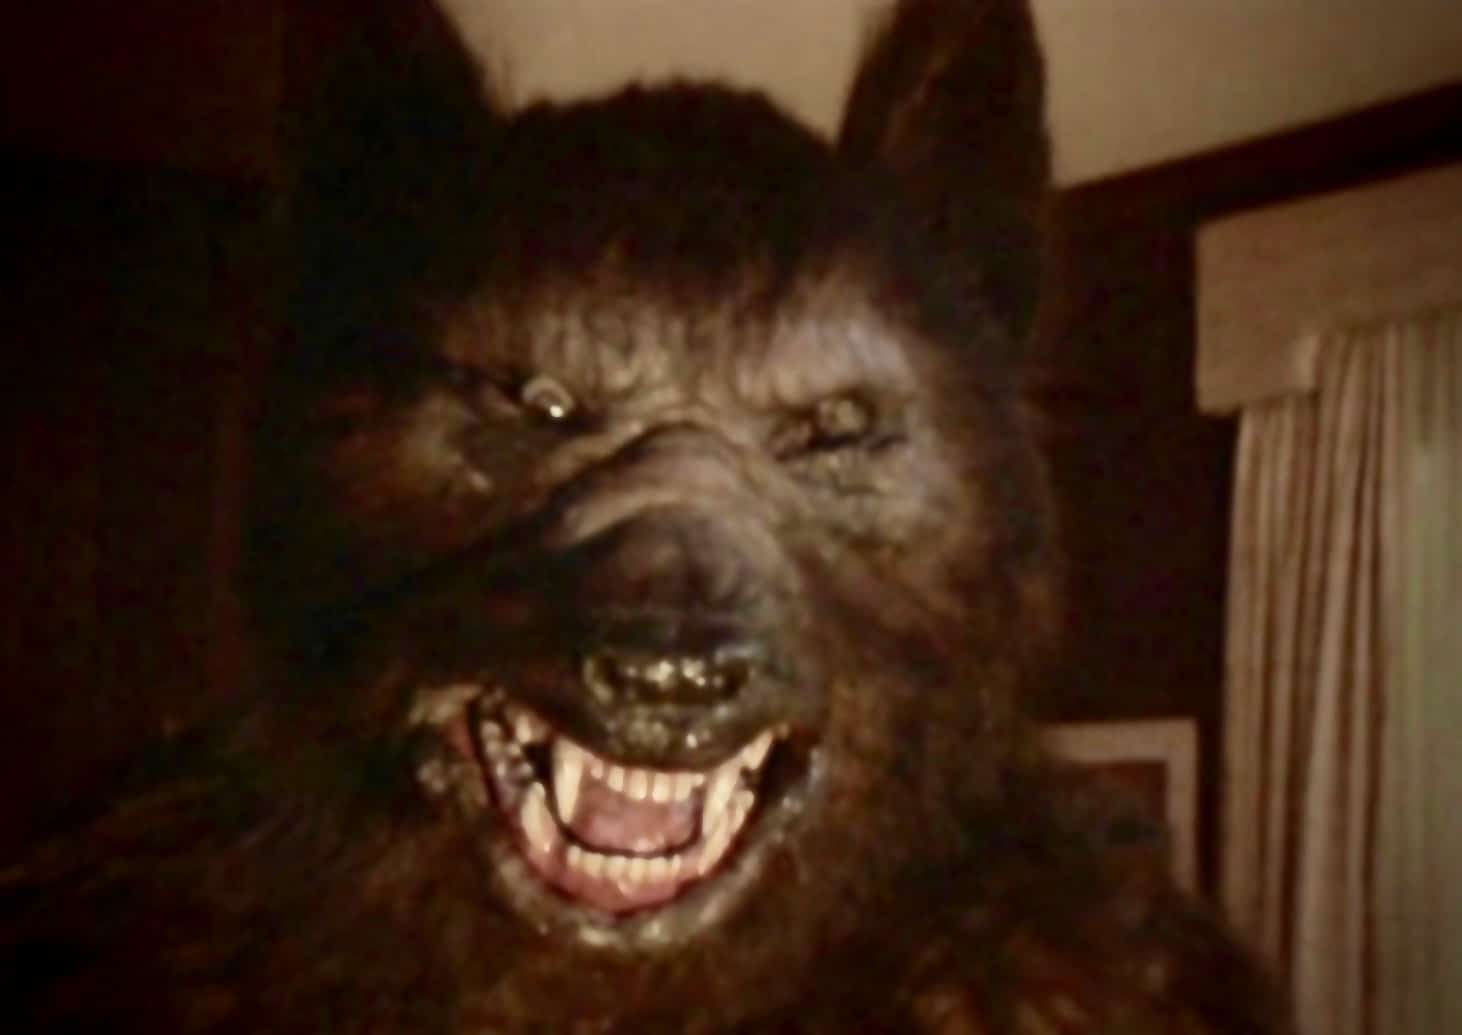 werewolf from the movie silver bullet breaking down a, Midjourney